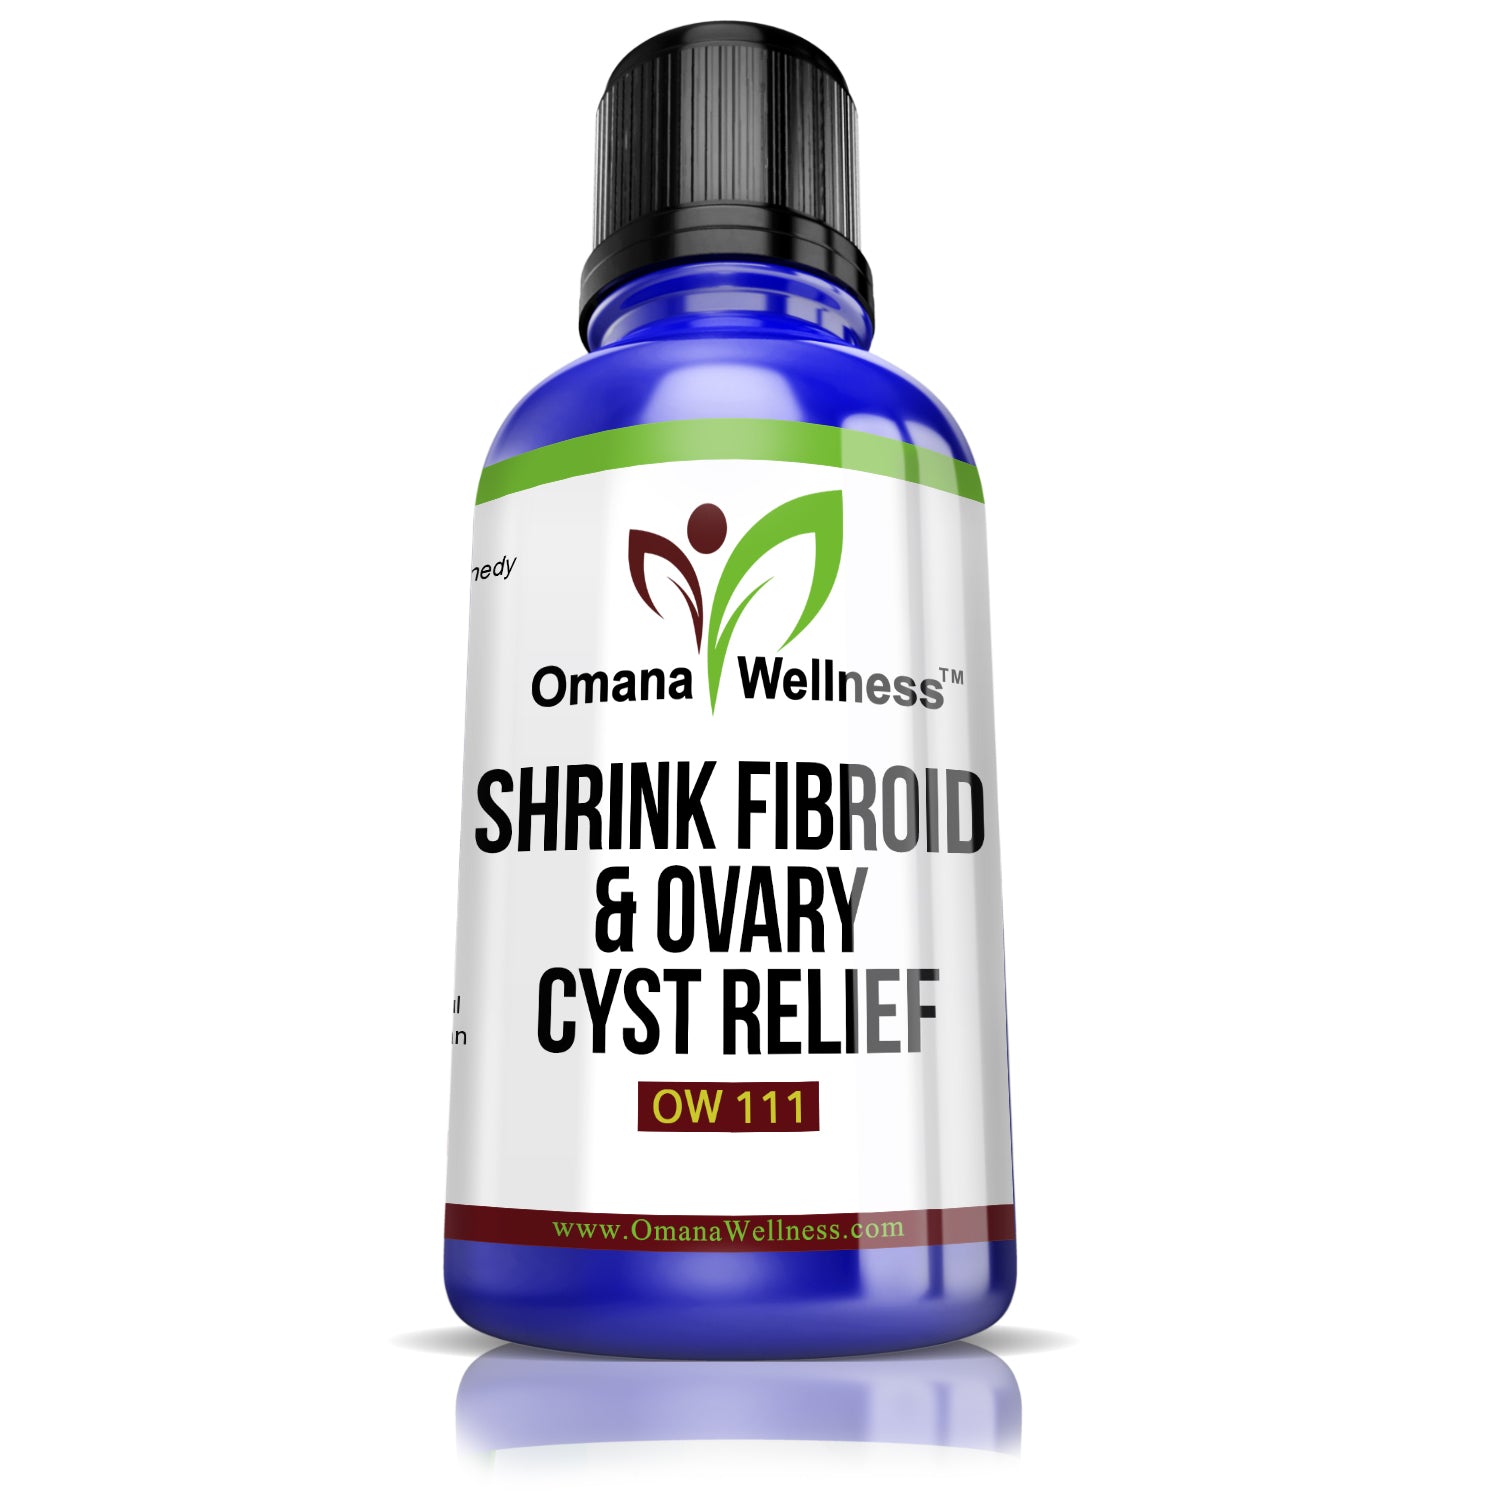 SHRINK FIBROID & OVARY CYST RELIEF OW111